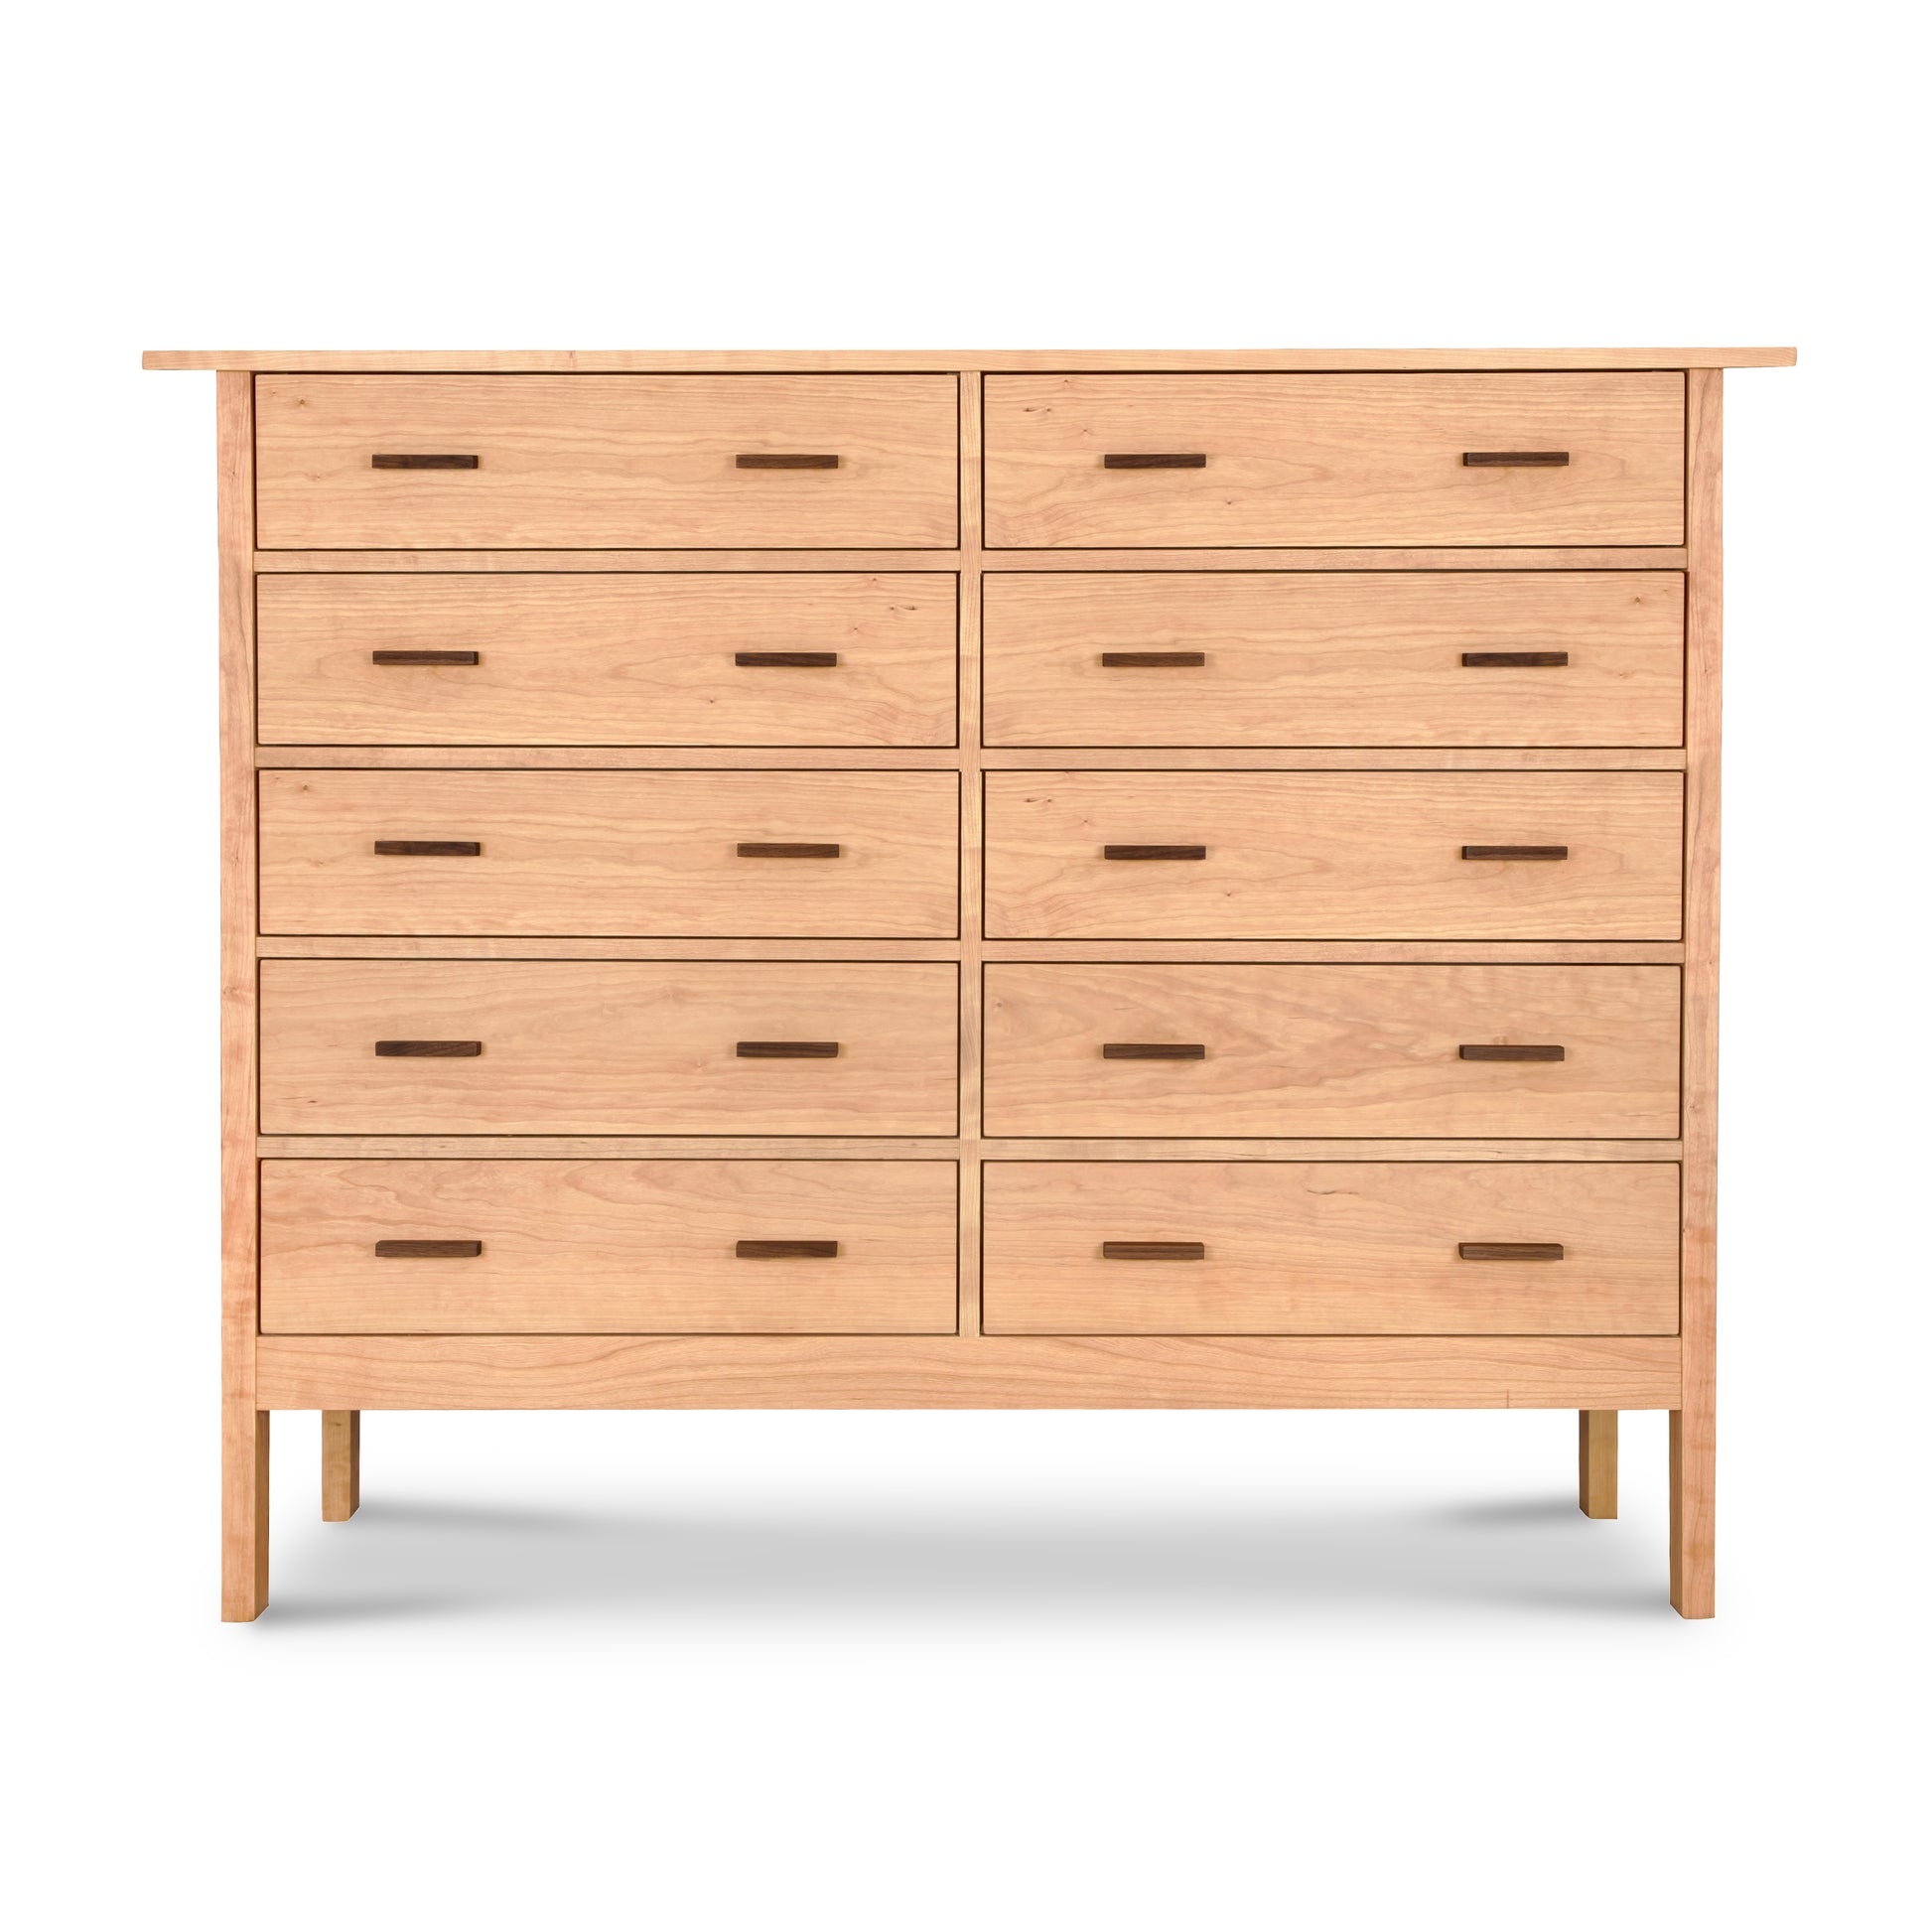 An eco-friendly Vermont Furniture Designs Modern Craftsman 10-Drawer Dresser with multiple drawers against a white background, offering ample bedroom storage.